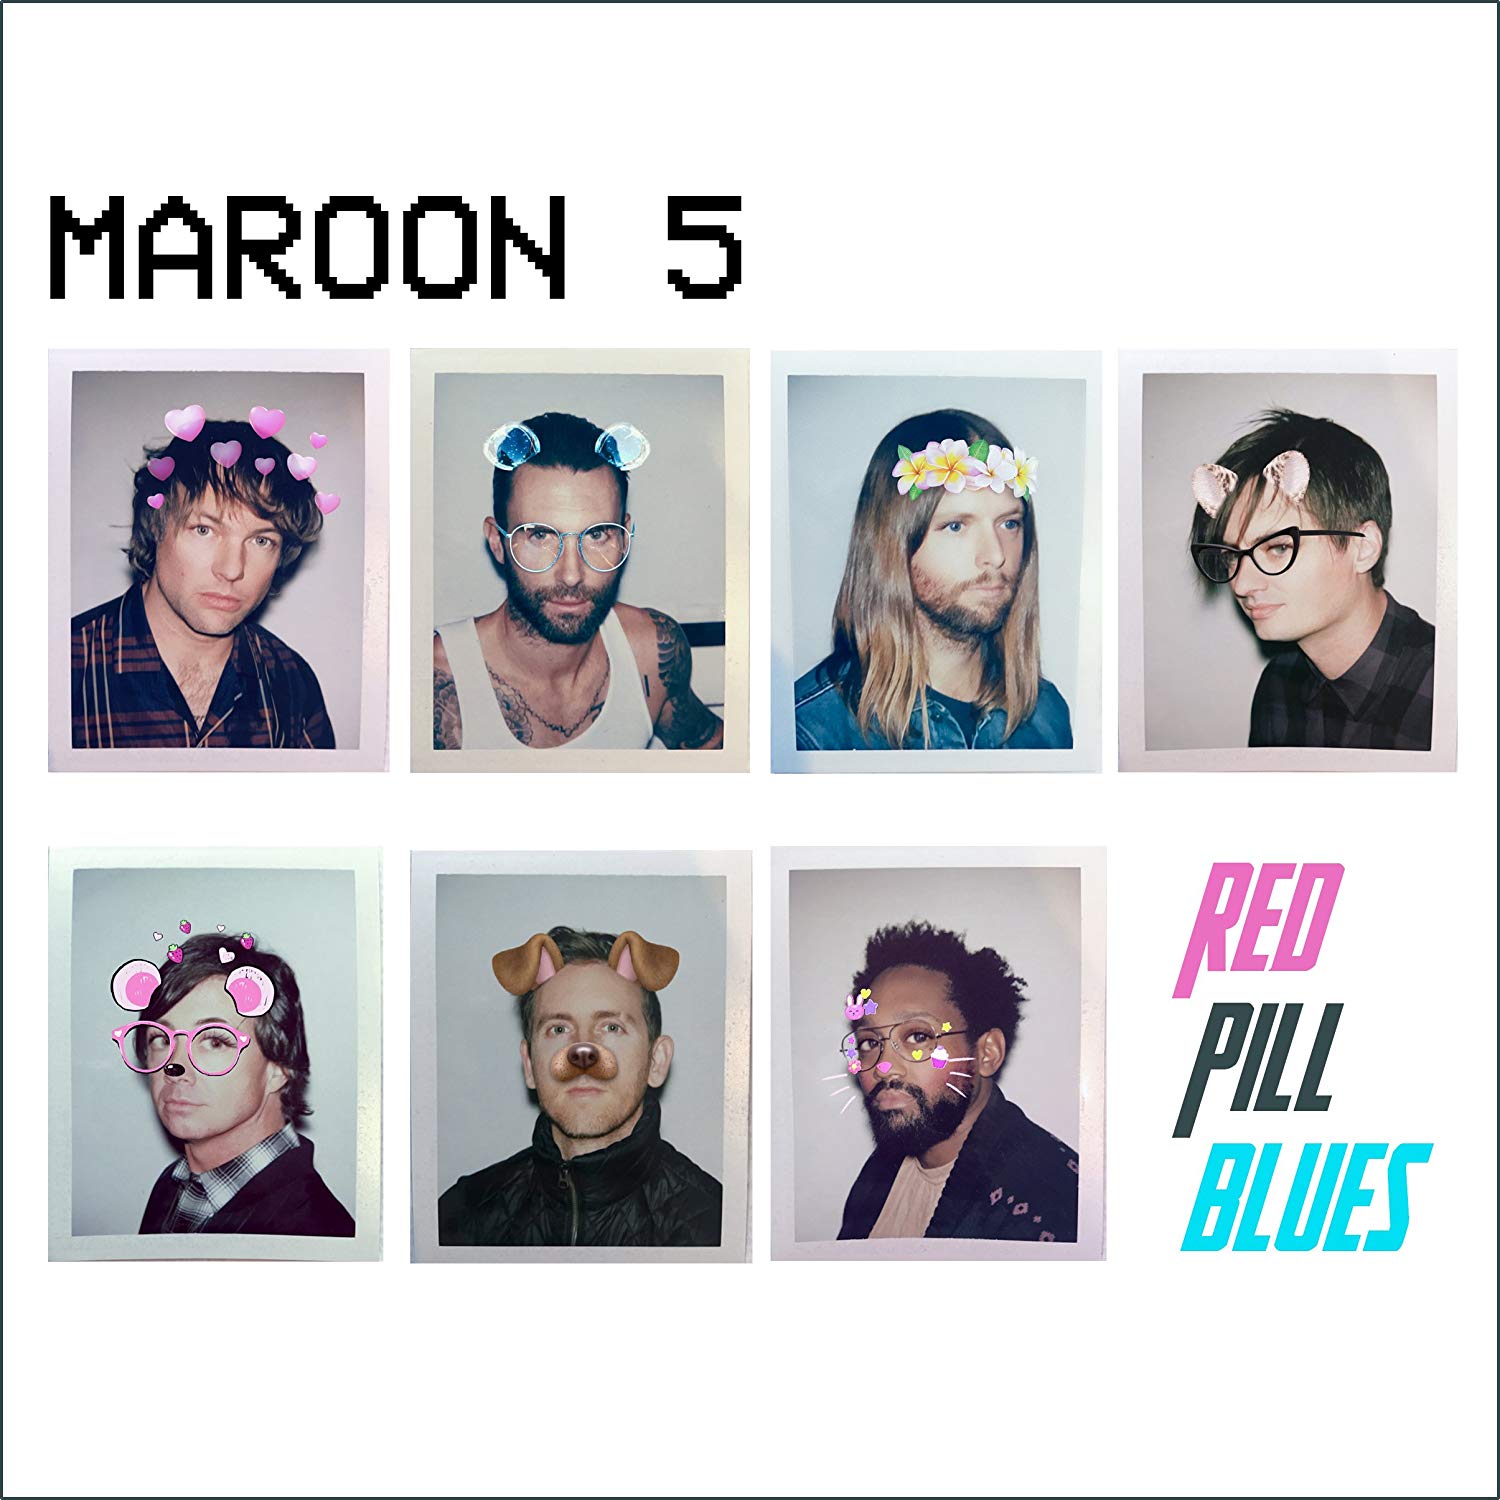 Red Maroon 5 Logo - Red Pill Blues by Maroon 5: Amazon.co.uk: Music